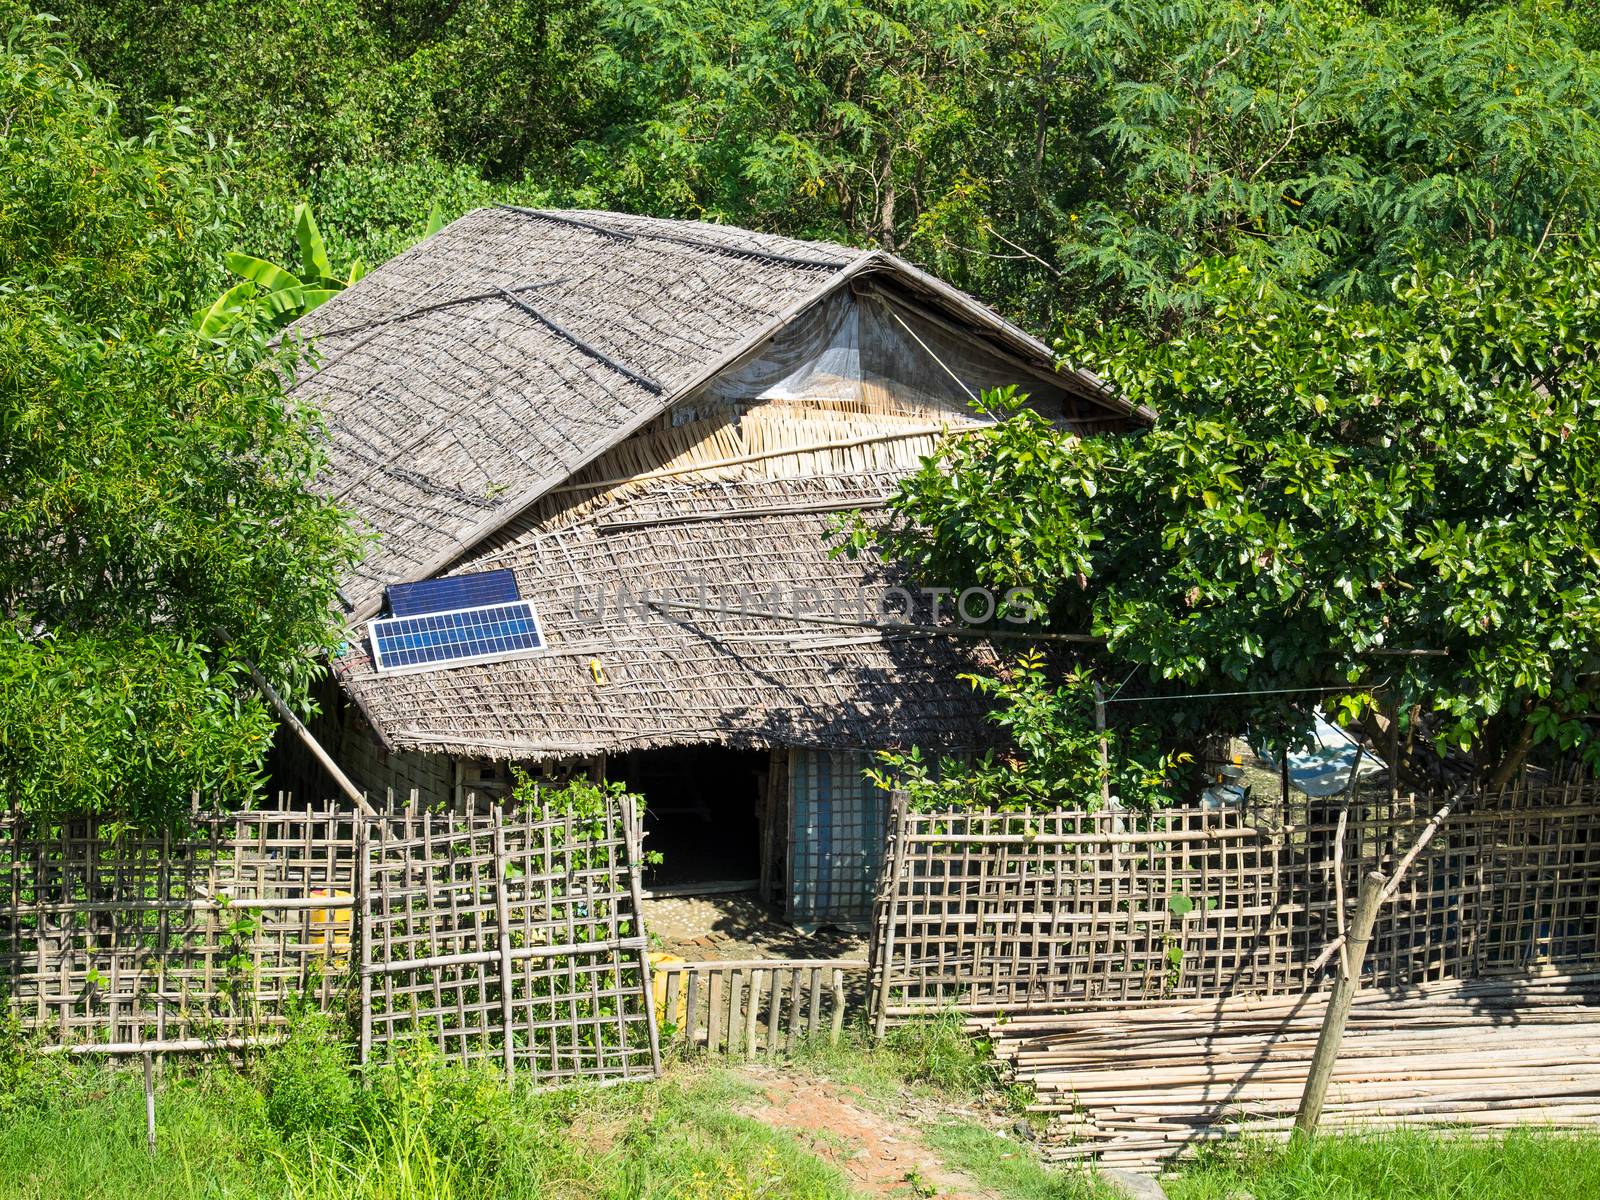 Traditional house made from straw in a village along the Kaladan River in the Rakhine State of Myanmar.